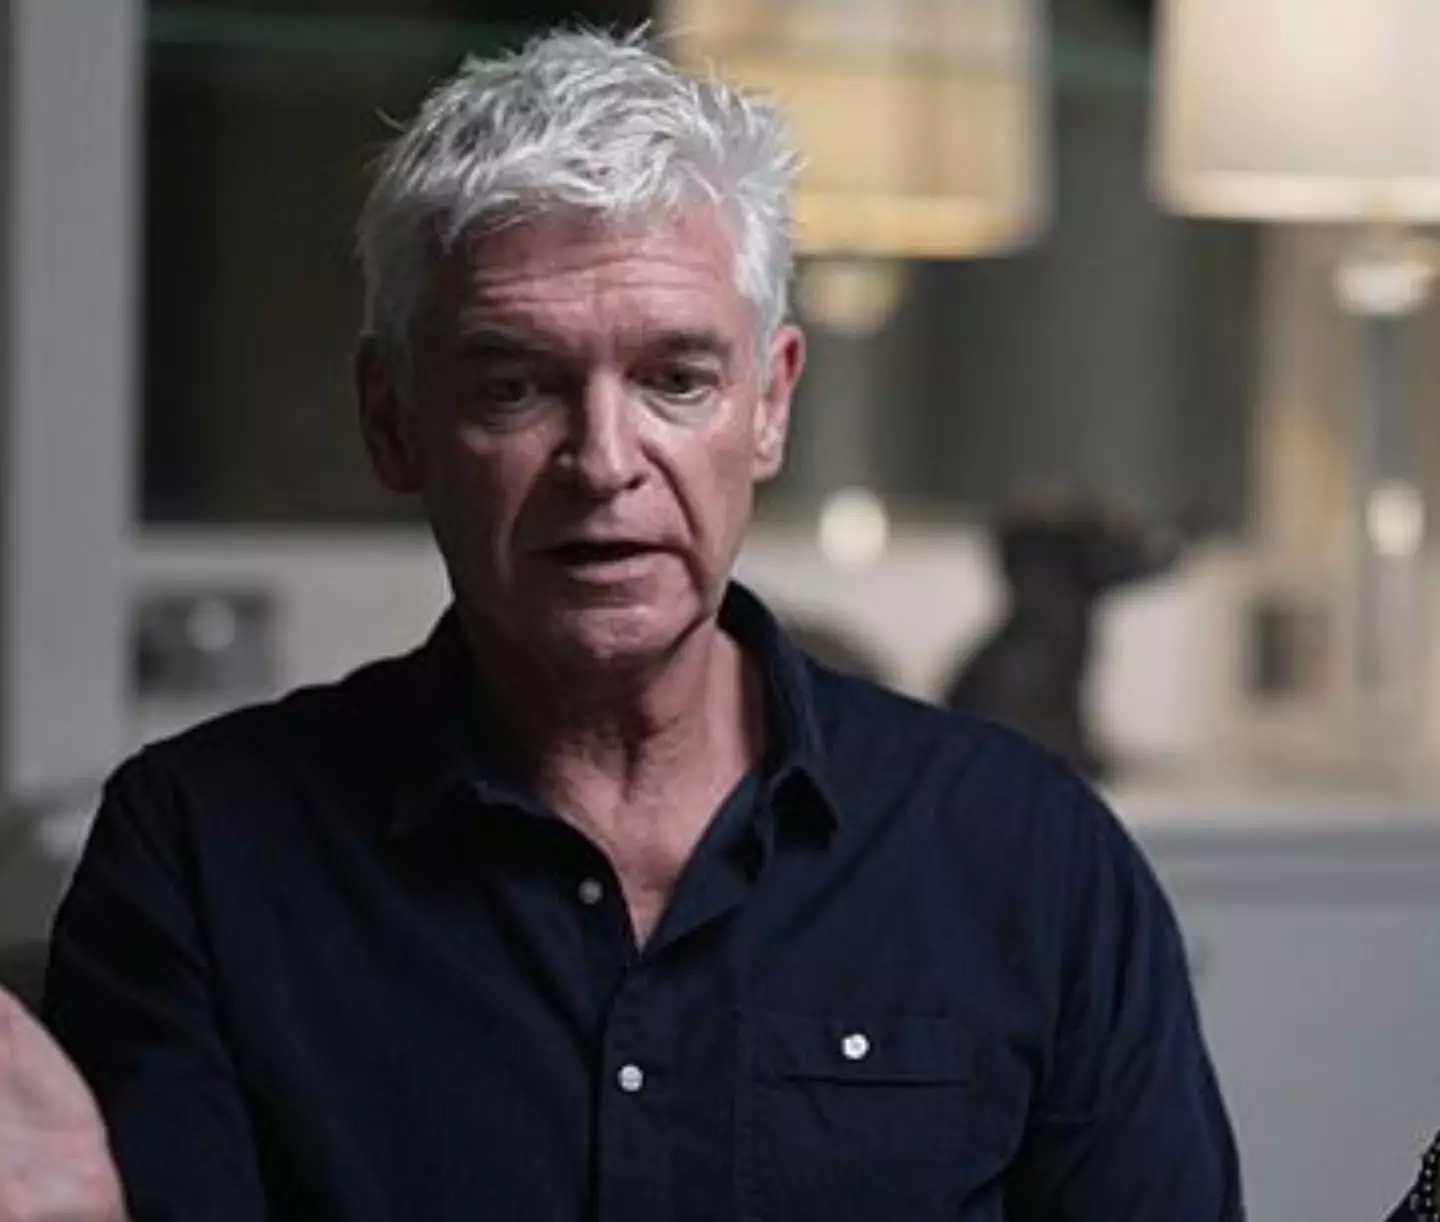 Phillip Schofield told the BBC that he's had suicidal thoughts.